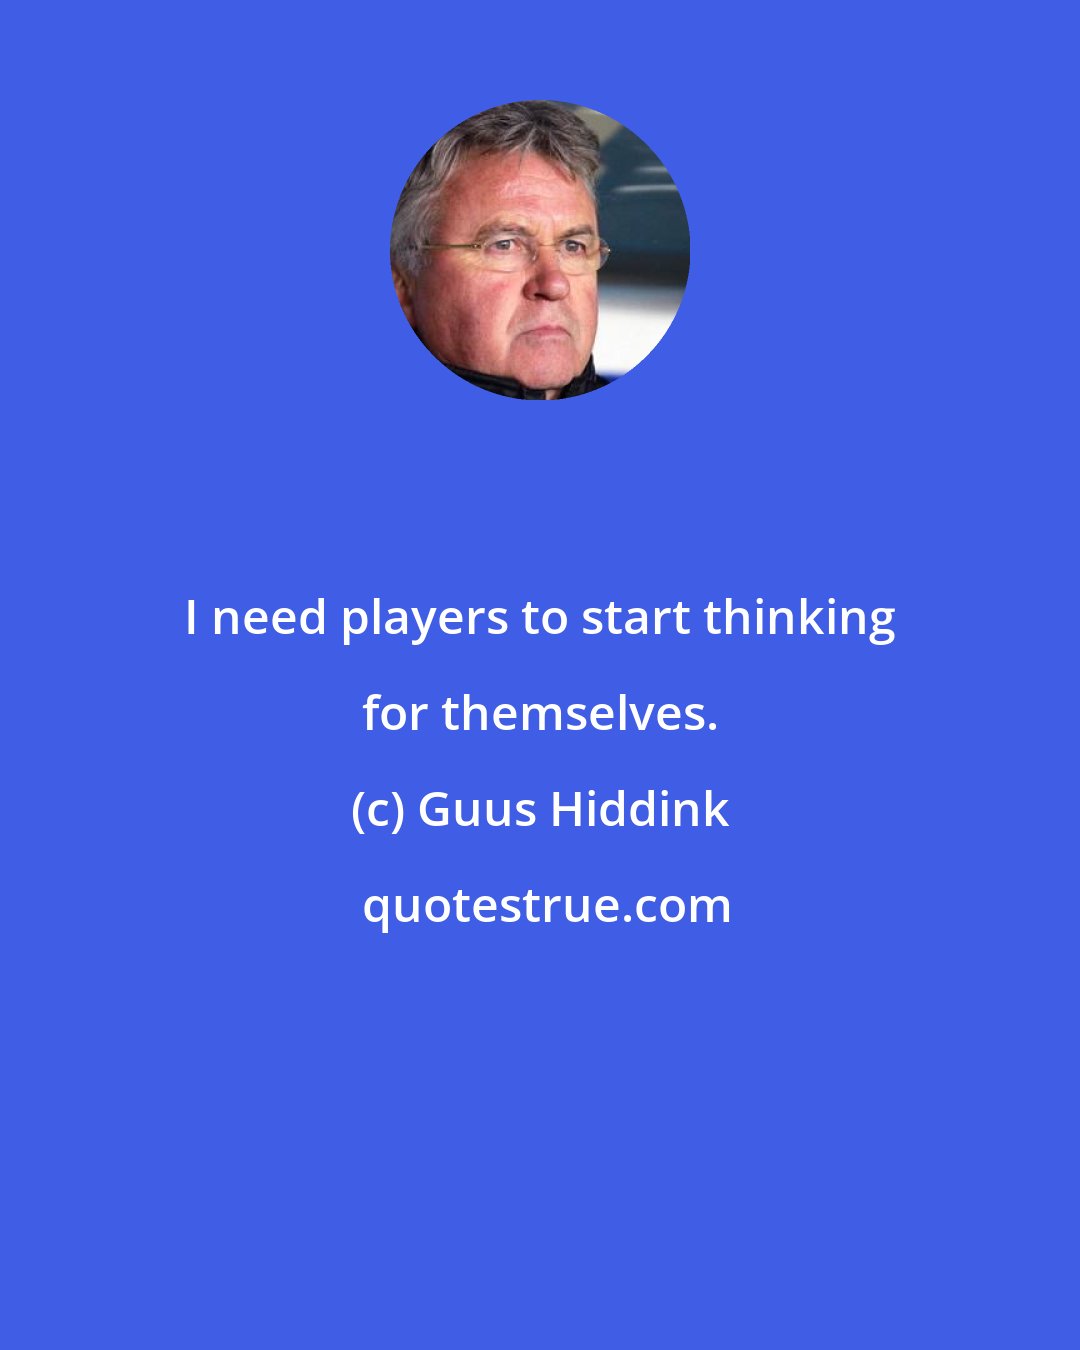 Guus Hiddink: I need players to start thinking for themselves.